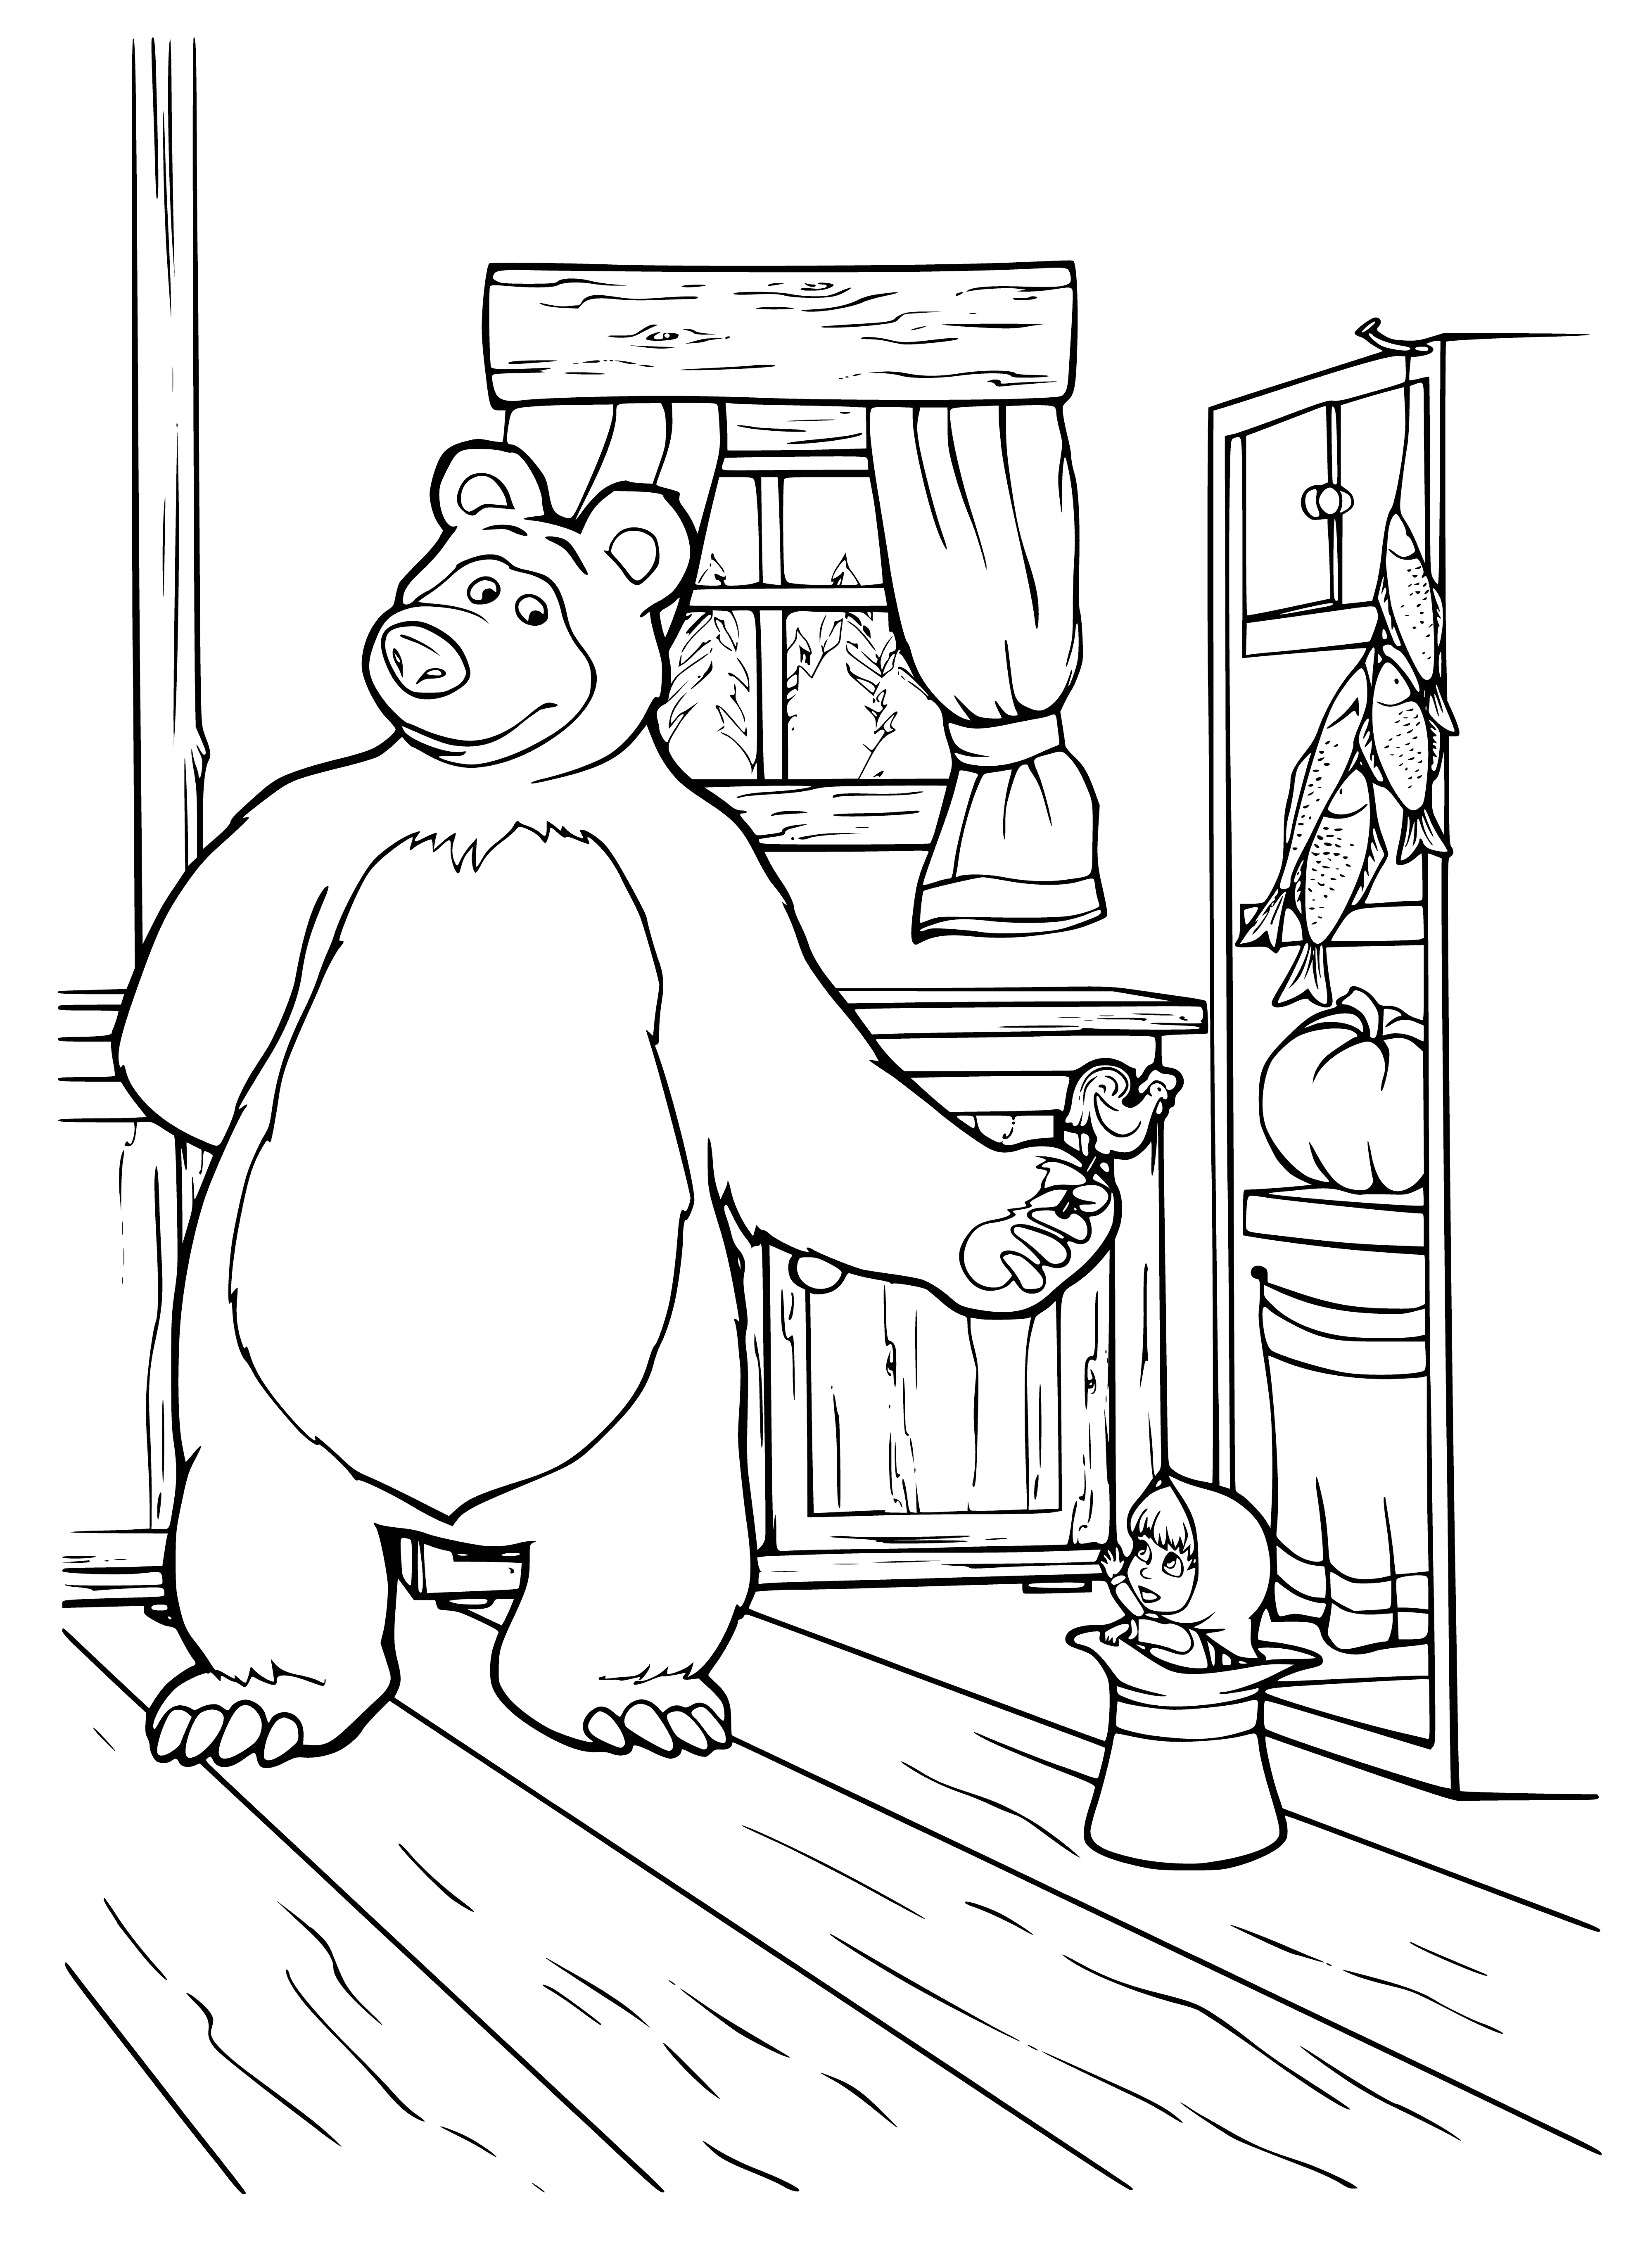 coloring page: Girl in pink dress, blue bow holds big red lollipop facing a blue bear.